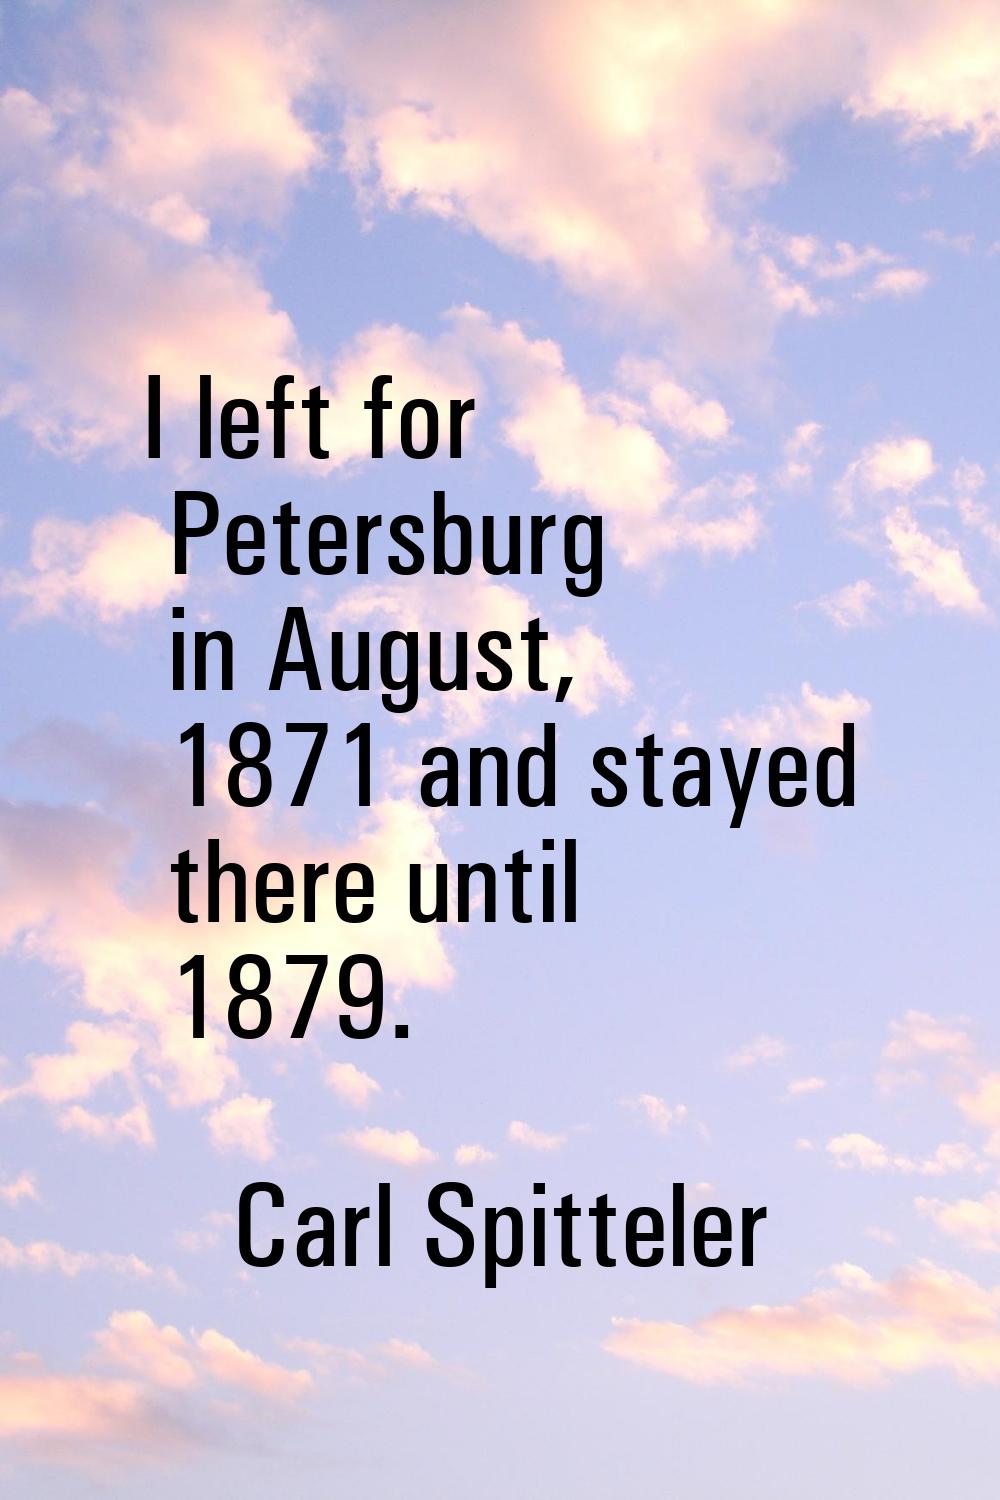 I left for Petersburg in August, 1871 and stayed there until 1879.